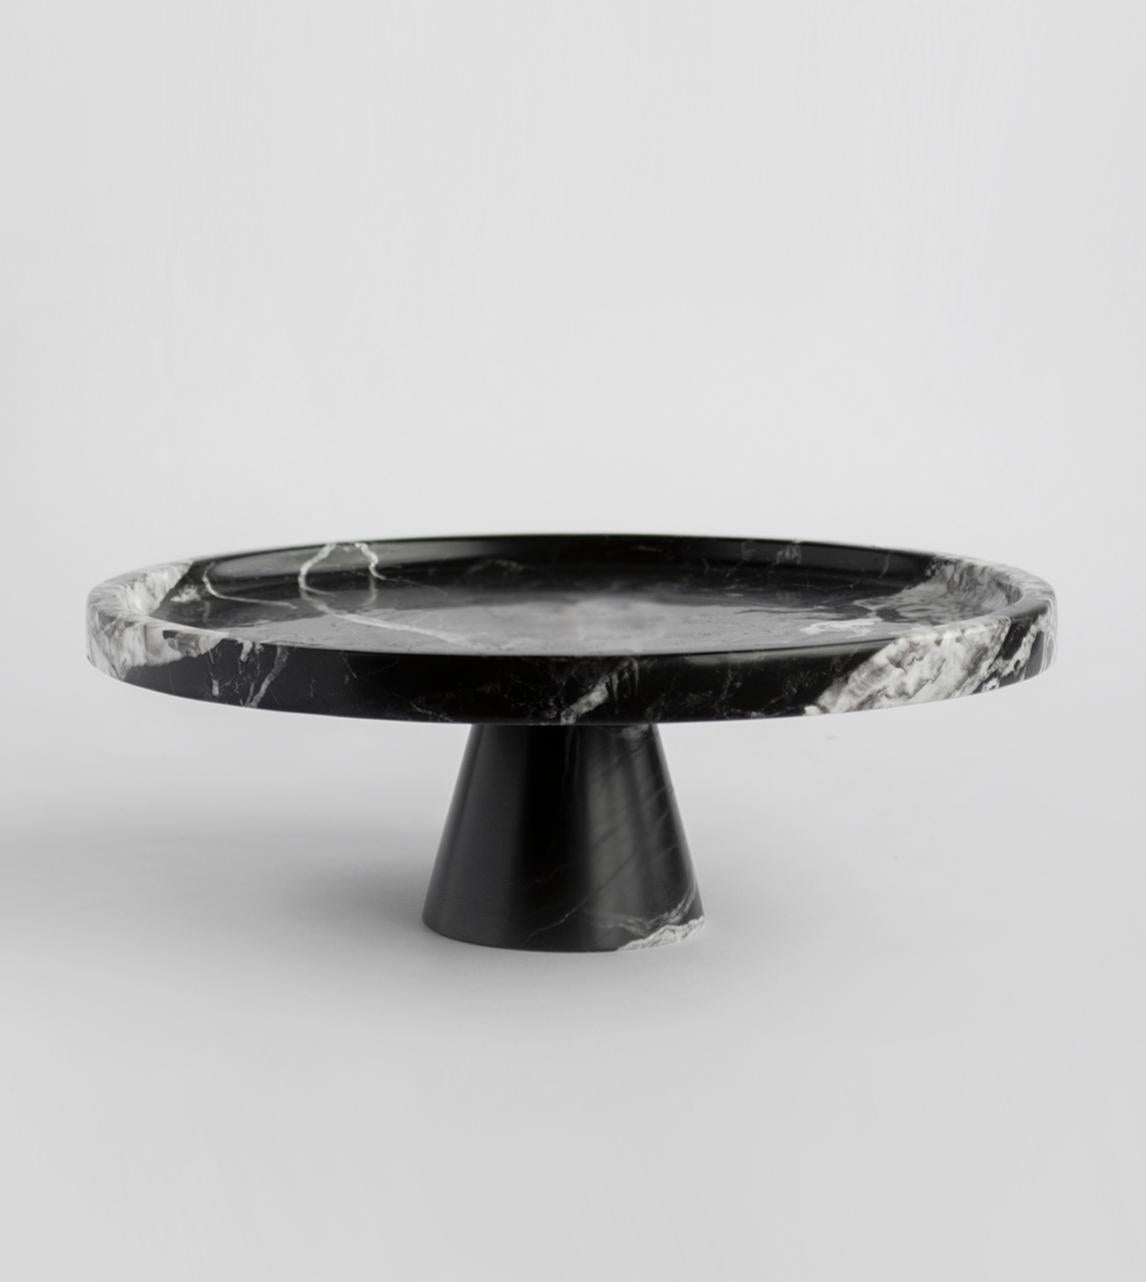 Put your delectable desserts on a pedestal with this gorgeous marble cake stand from Kiwano. Hand crafted by Turkish artisans, this stylish display will ensure your baking skills never go unnoticed. Glass dome not included. 

There may be natural